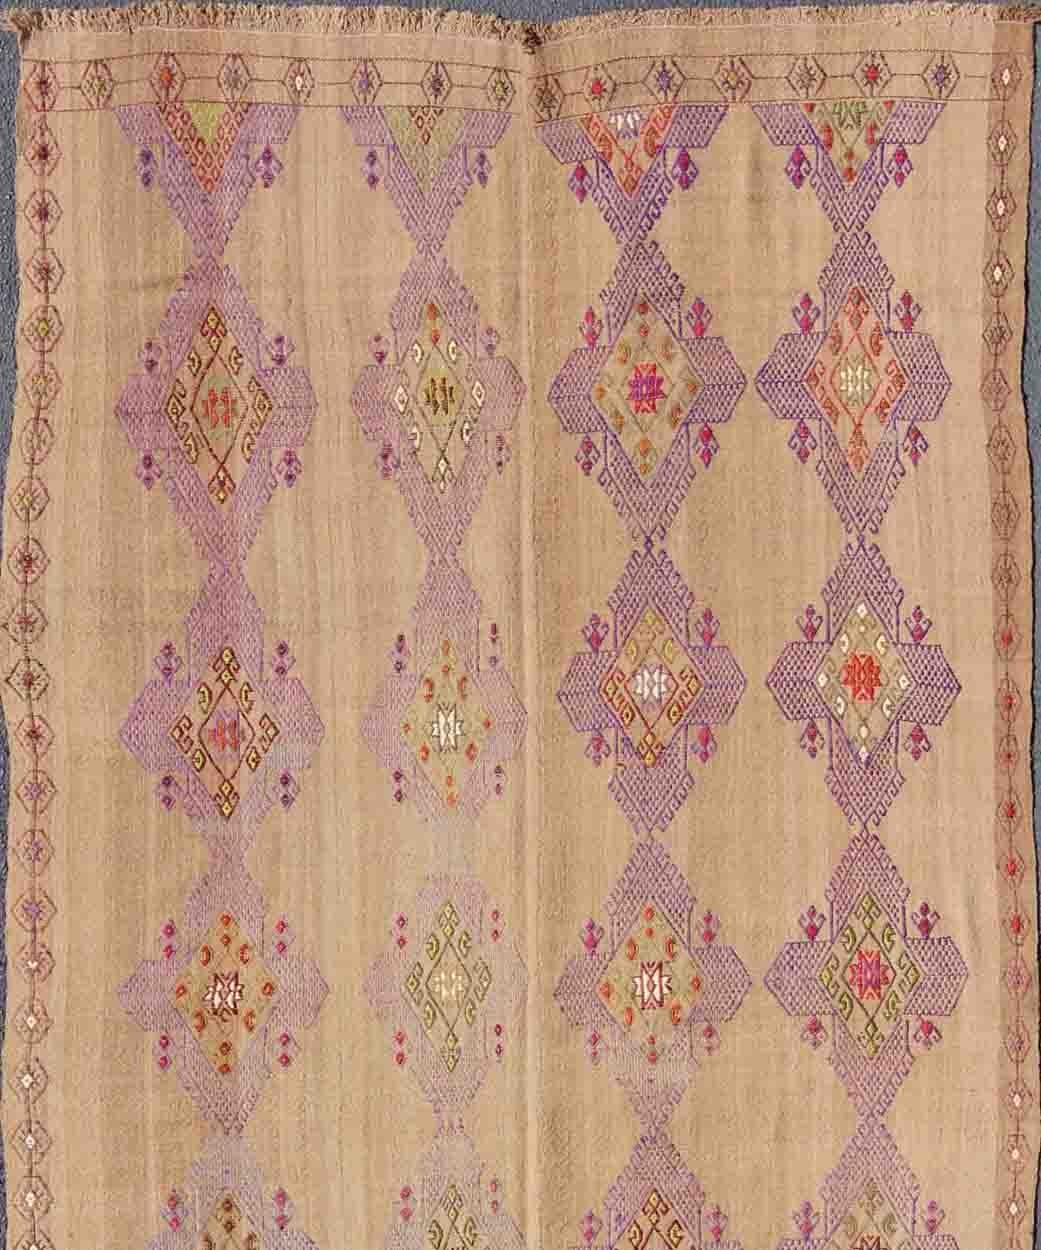 Tribal Turkish Kilim Hand Woven Embroidered Purple Diamonds on a Tan Background For Sale